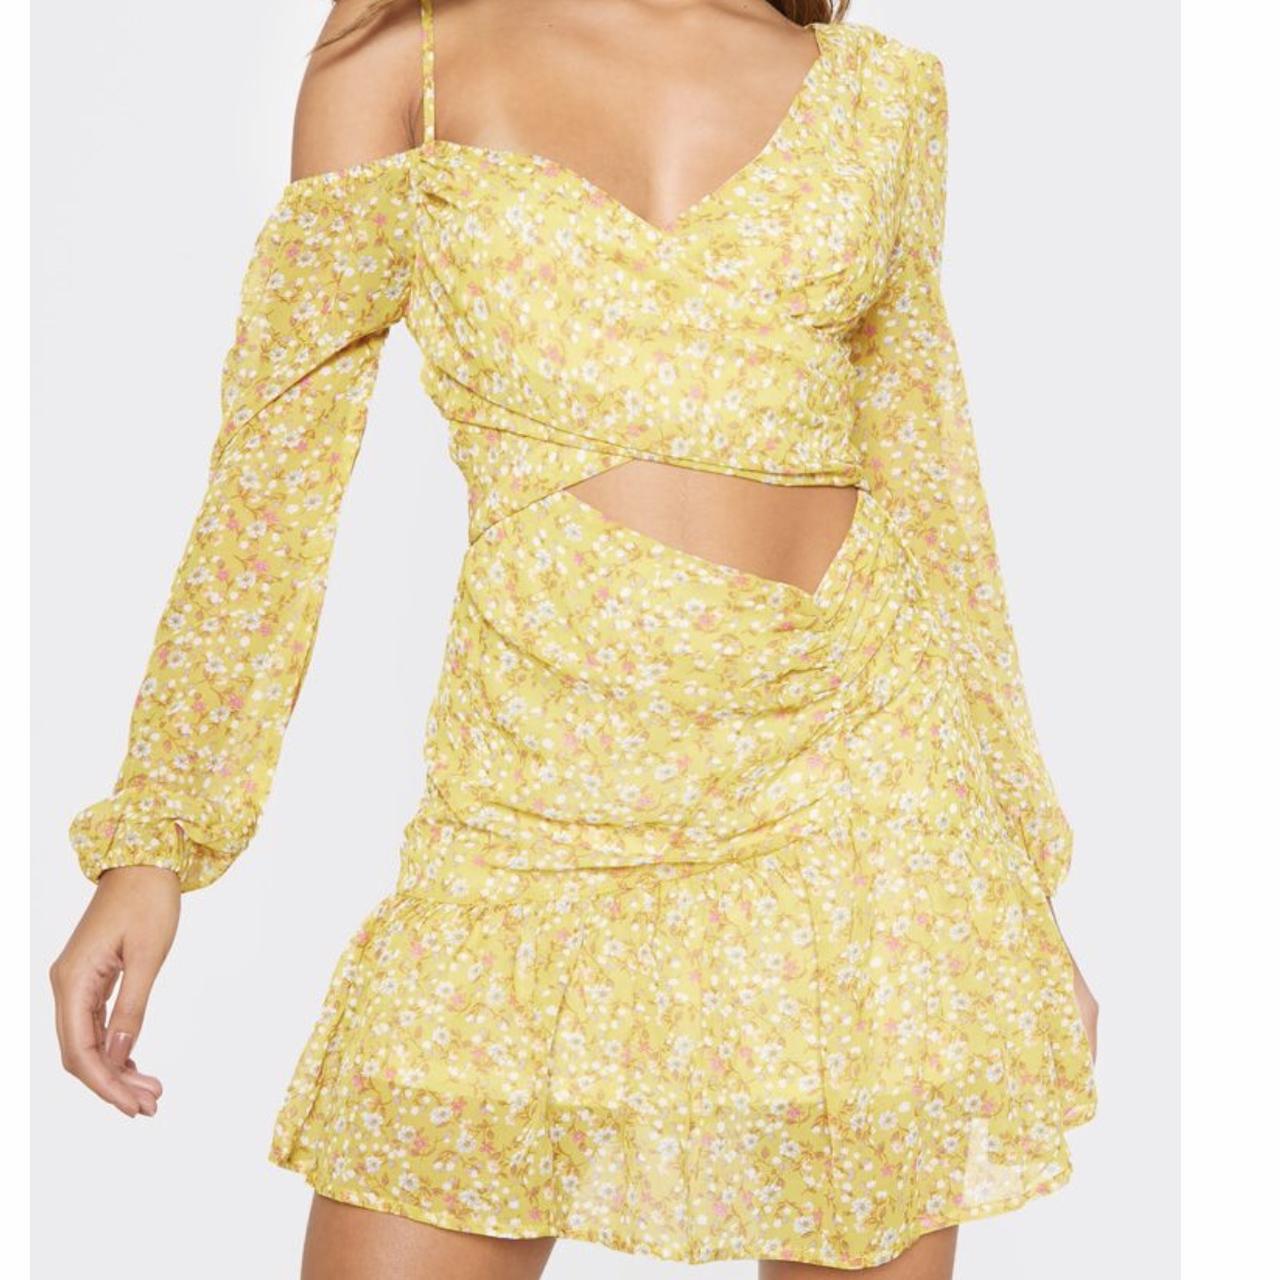 Pretty little thing yellow floral dress ...